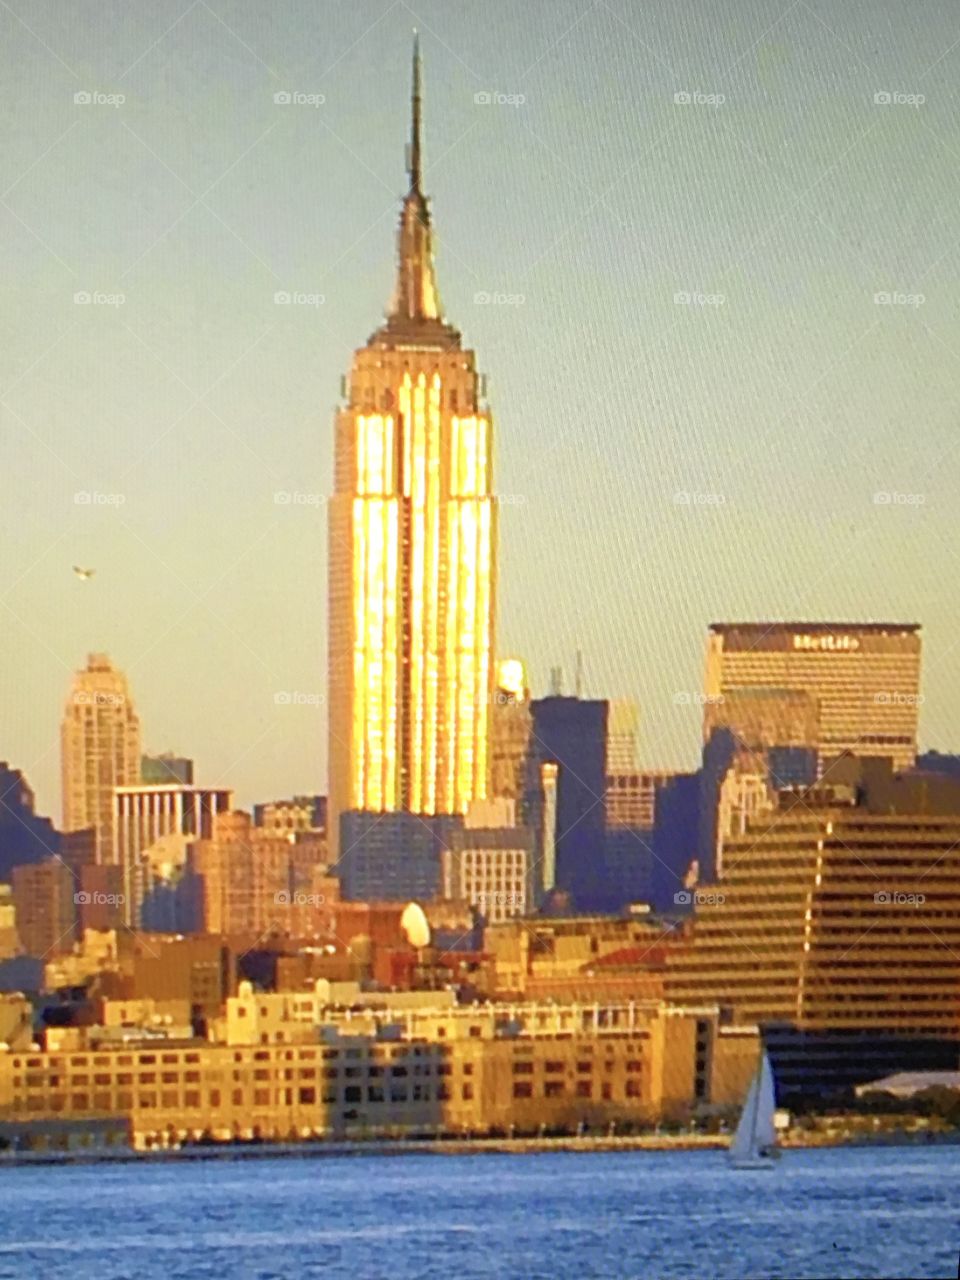 A glorious shot of the sun’s reflection off the side of The Empire State Building in New York City, NY!